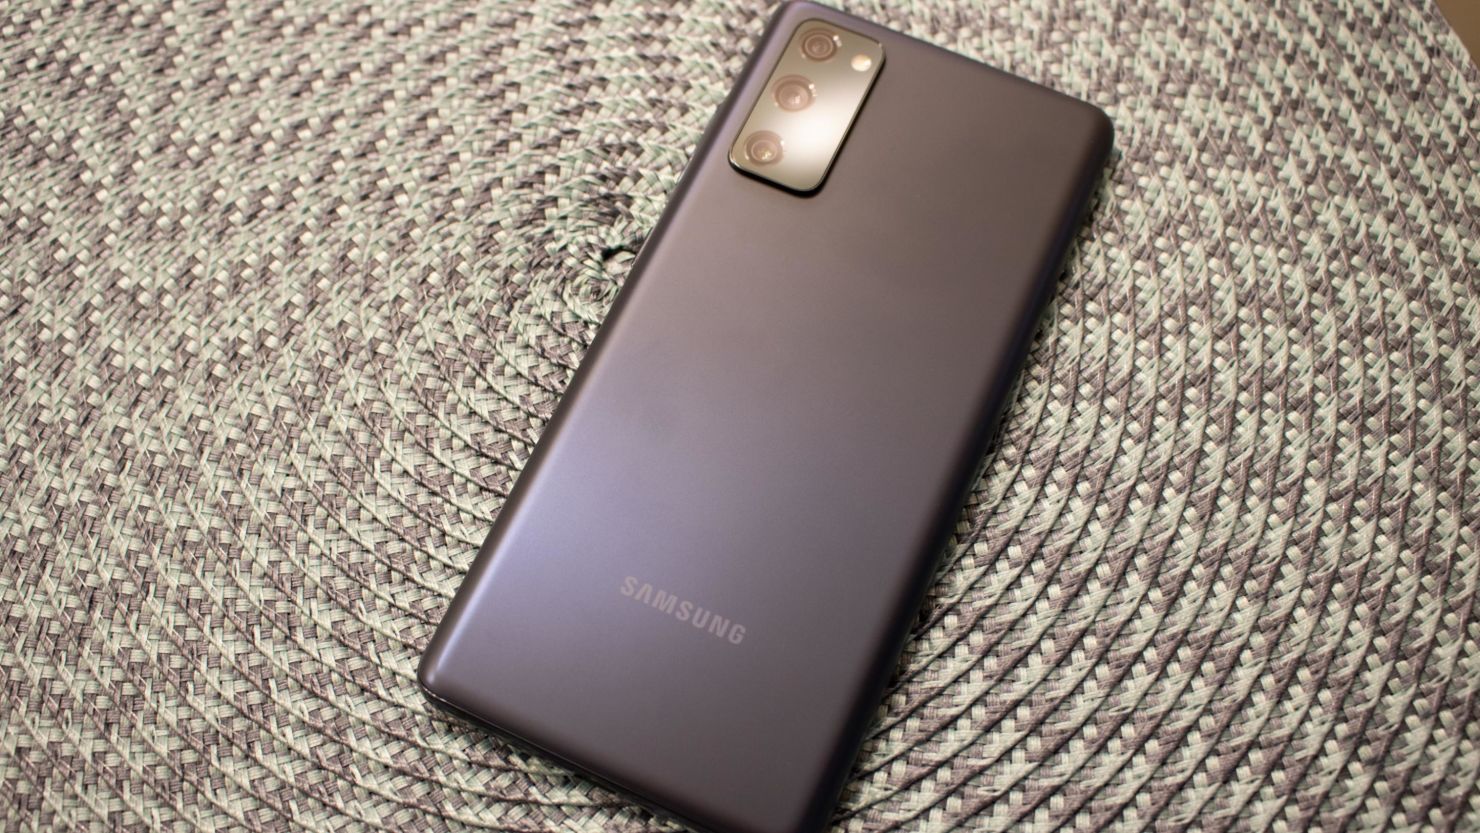 Samsung Galaxy S20 FE review: Is it only for Samsung fans